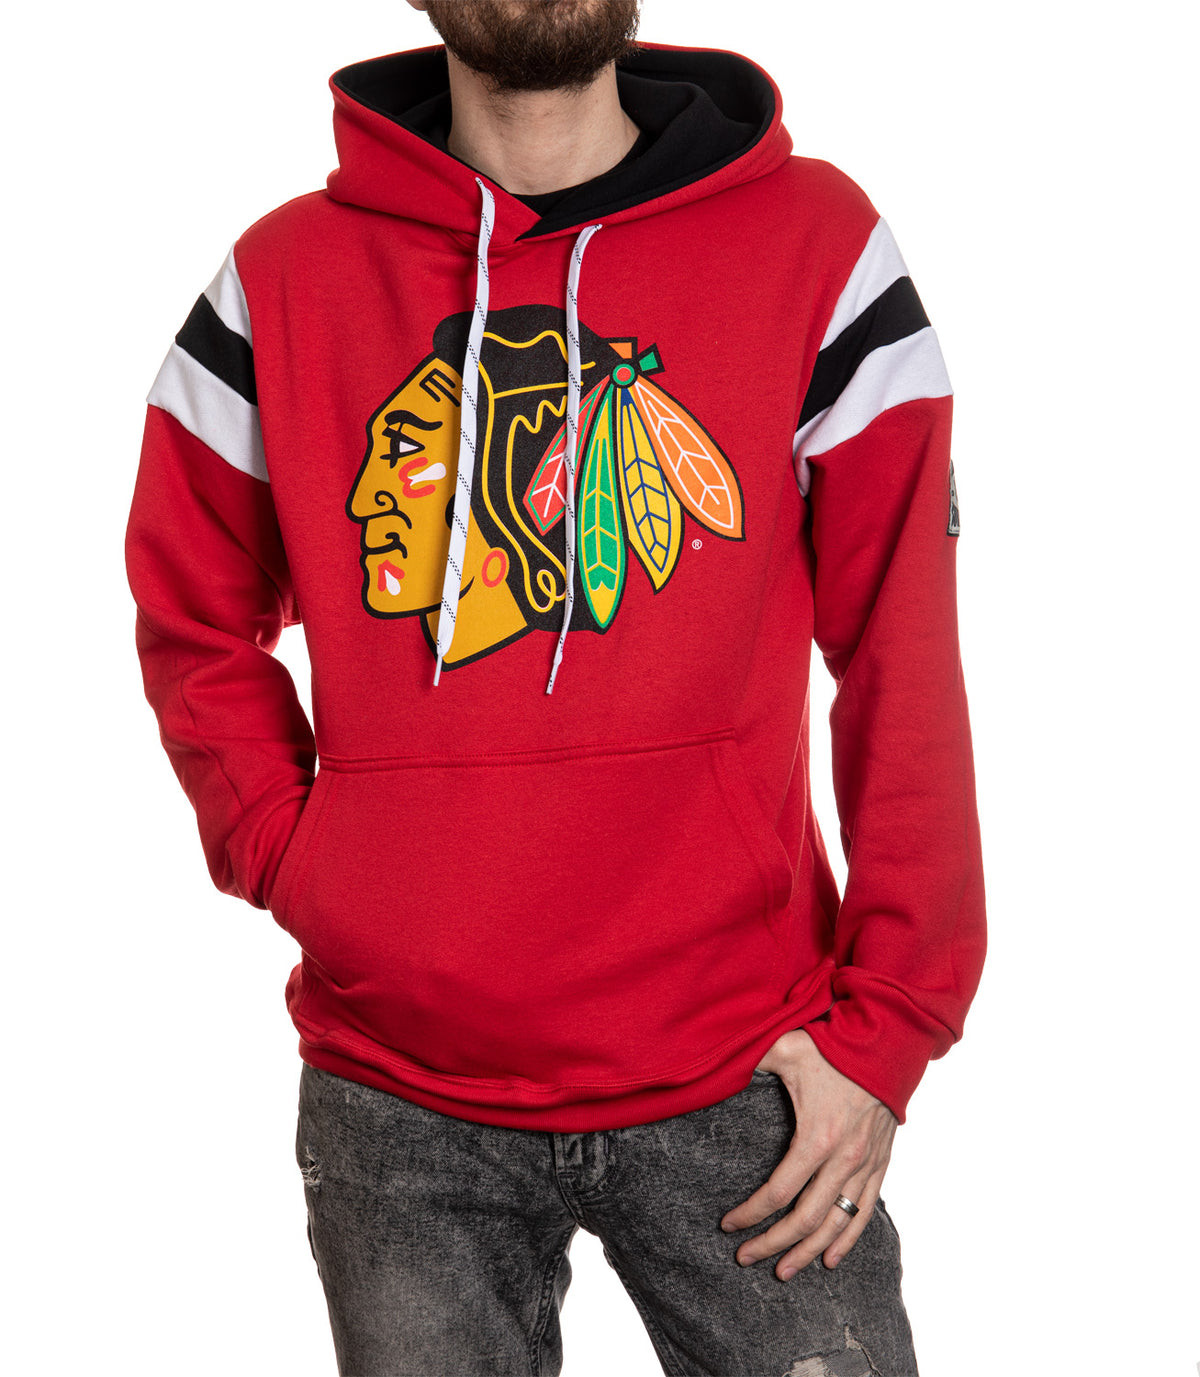 New NHL Chicago Blackhawks old time jersey style midweight cotton